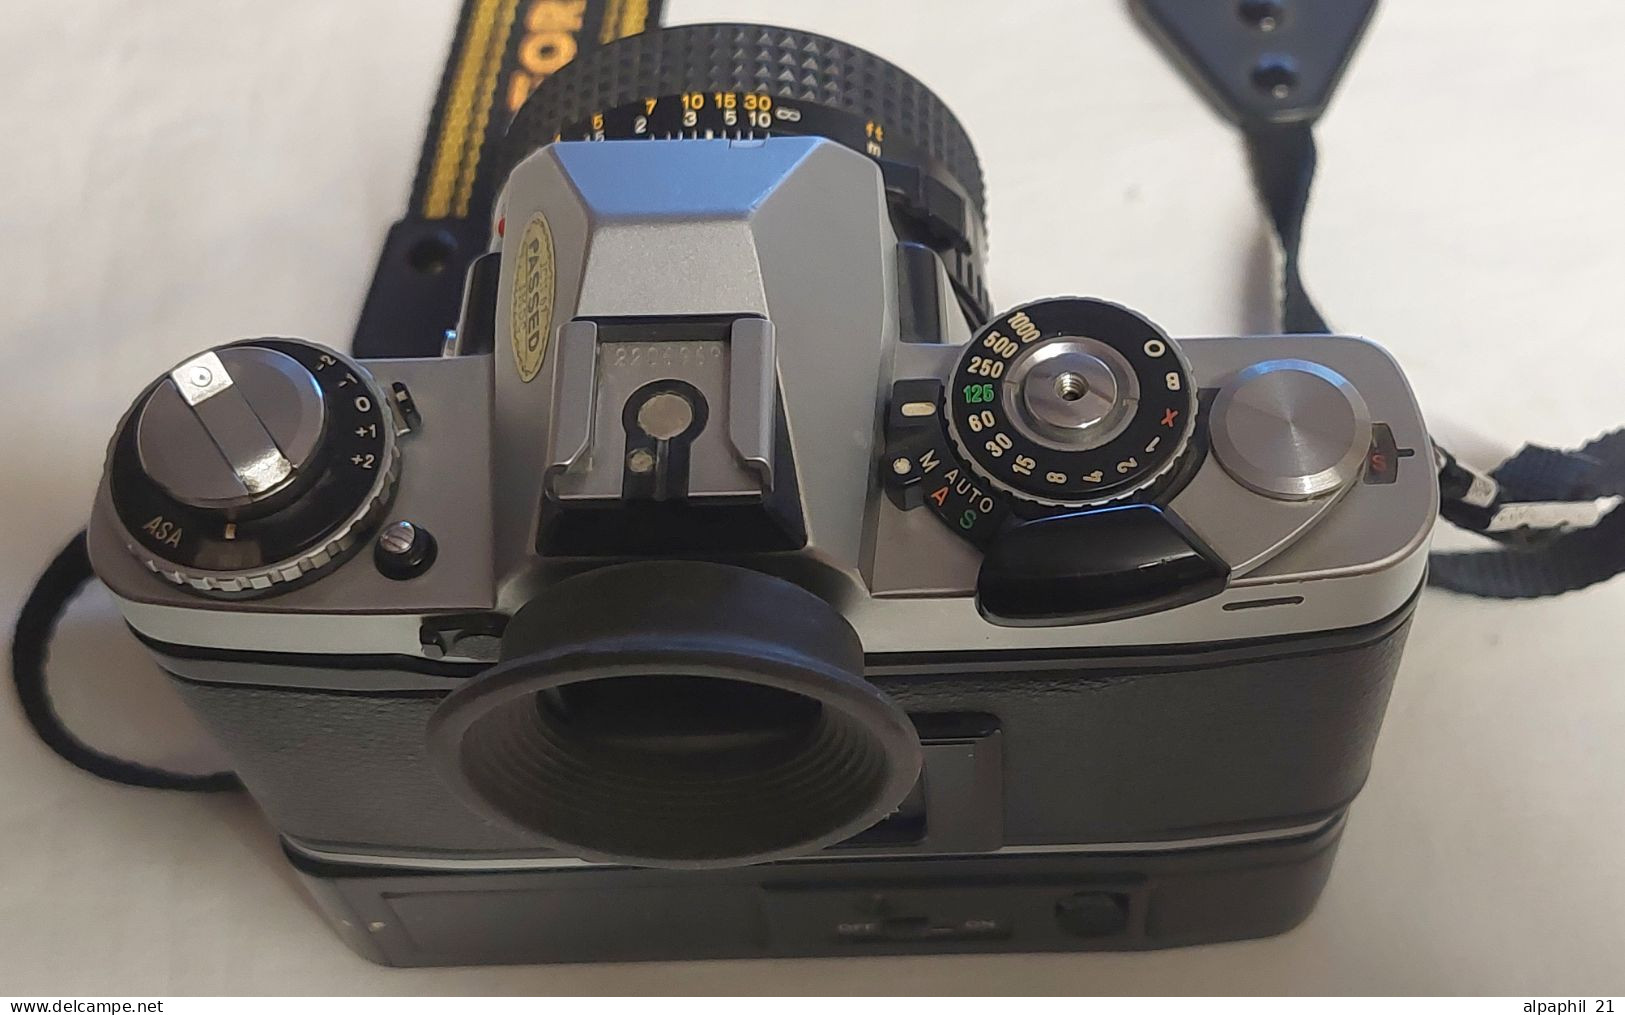 Minolta XD7 With Auto Winder D And Lenses - Cameras